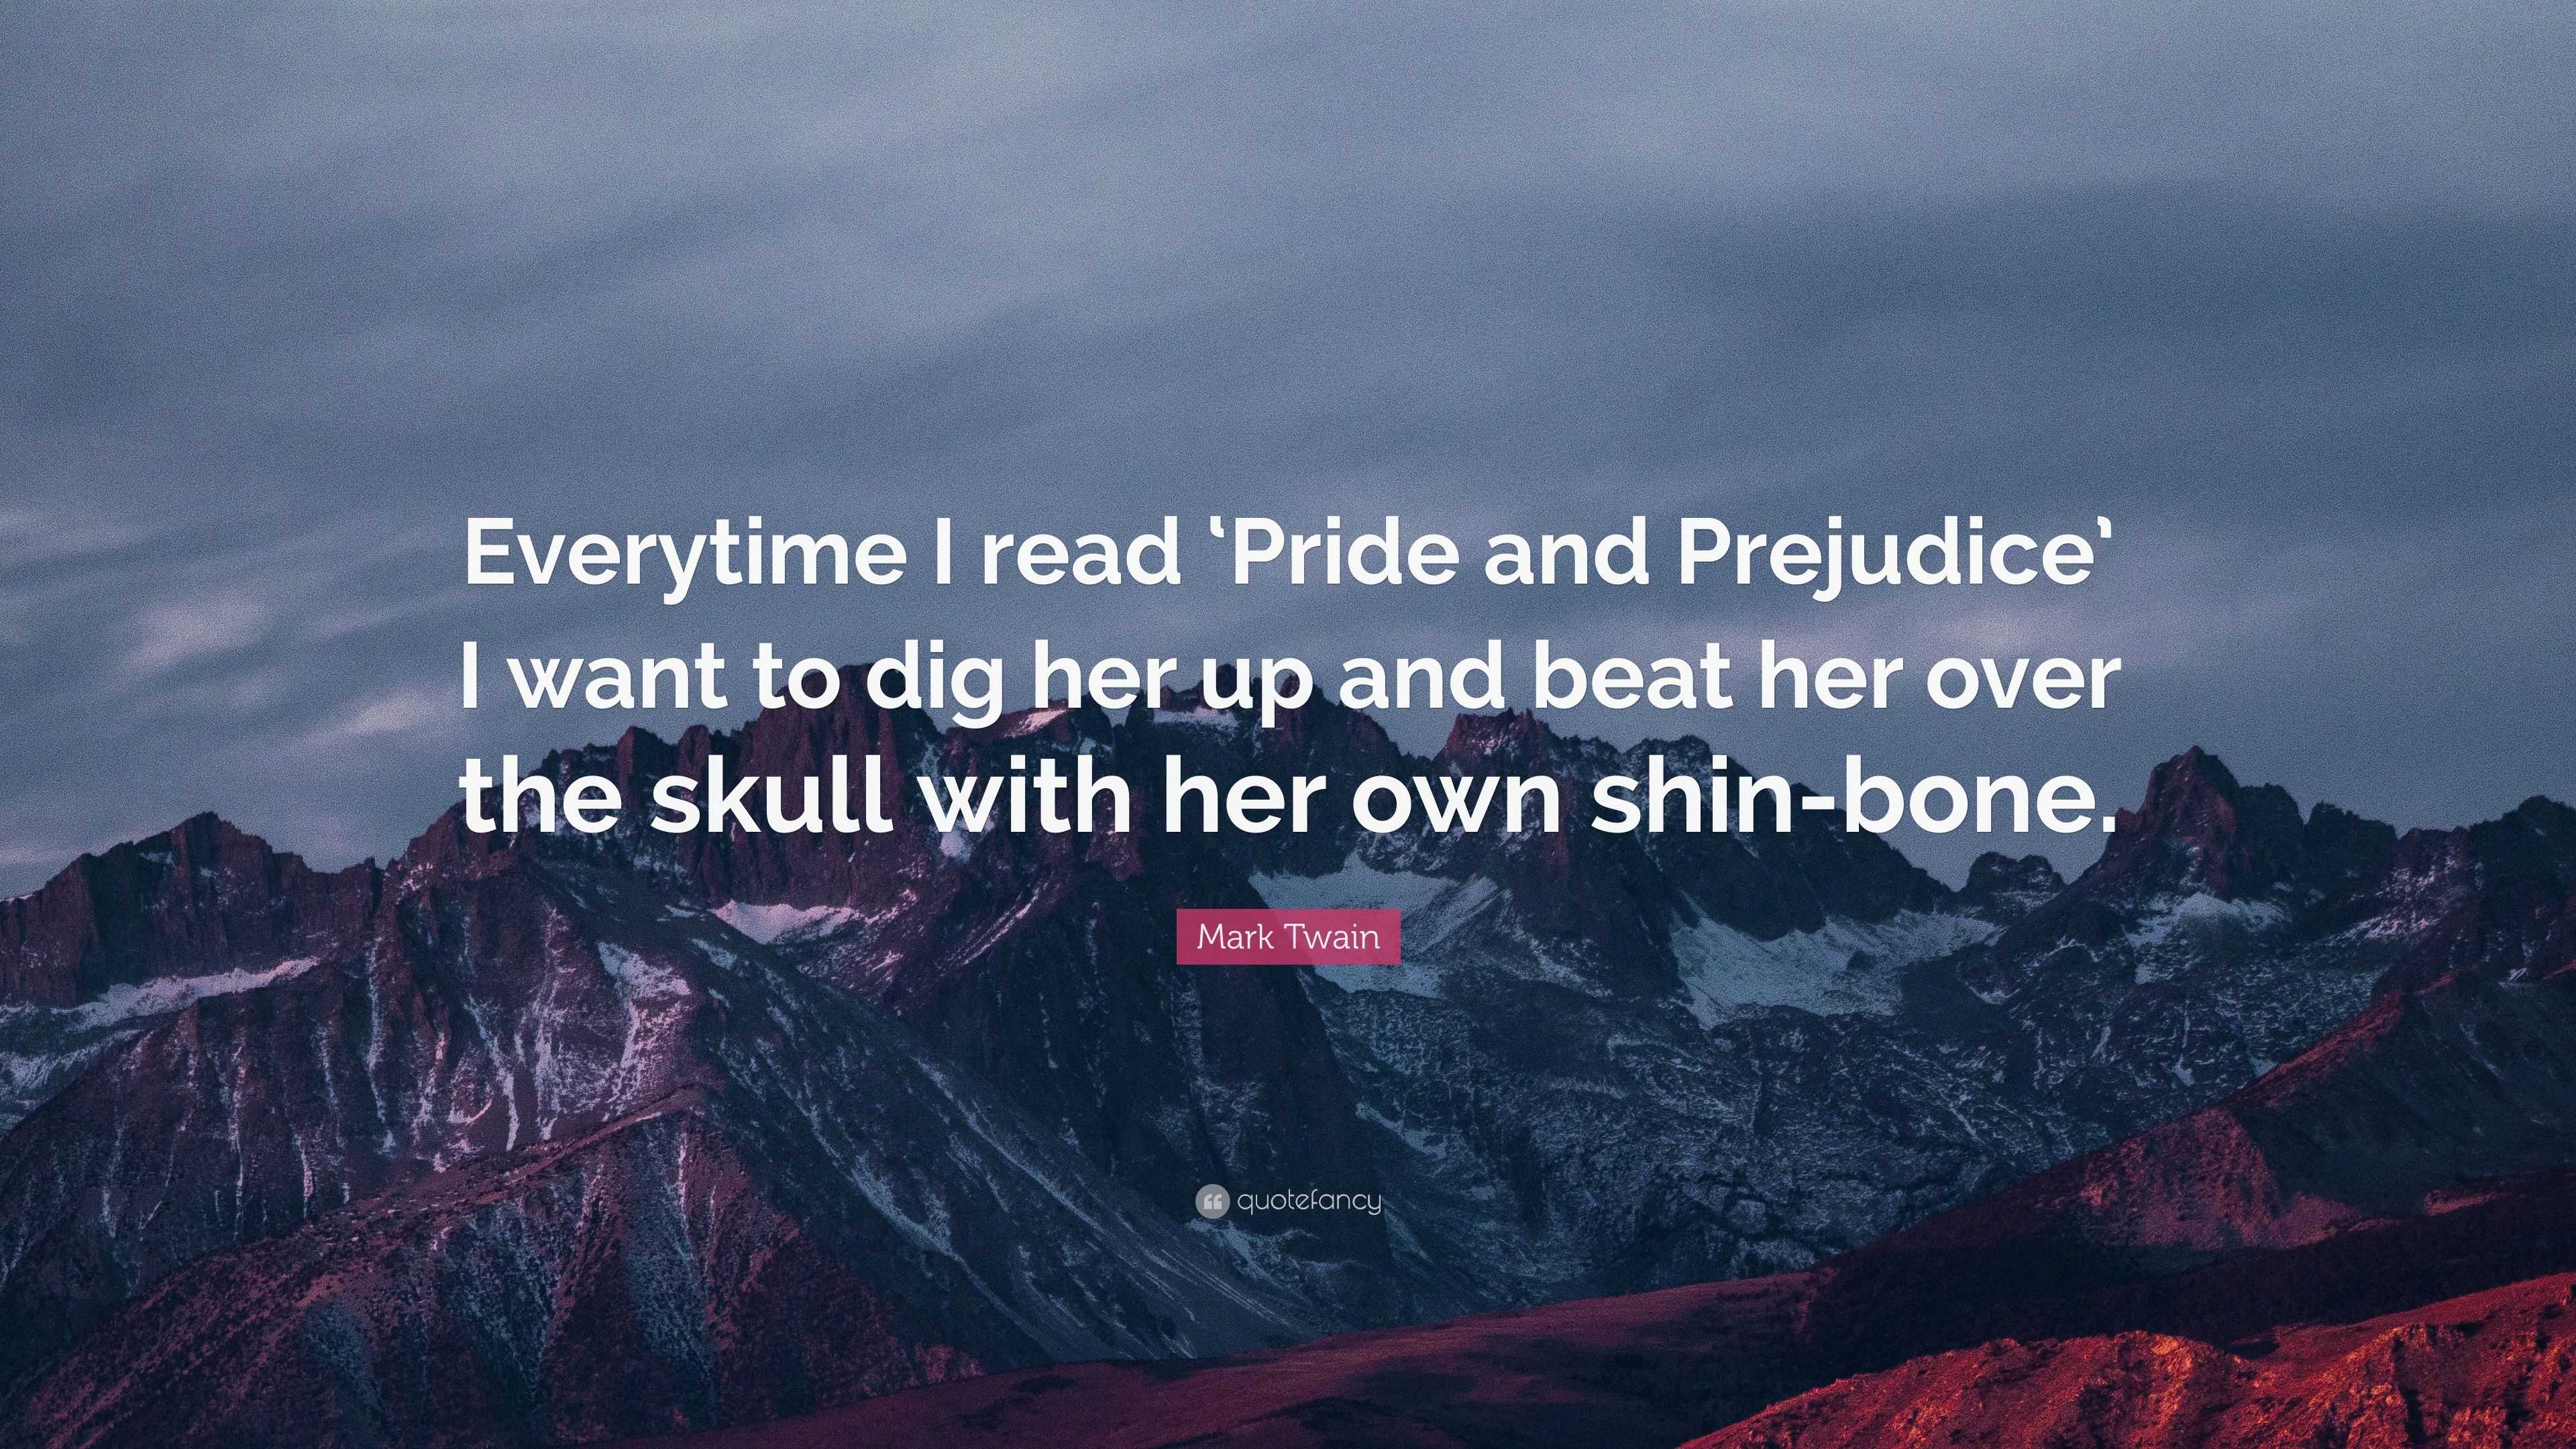 Mark Twain Quote: “Everytime I read 'Pride and Prejudice' I want to dig her  up and